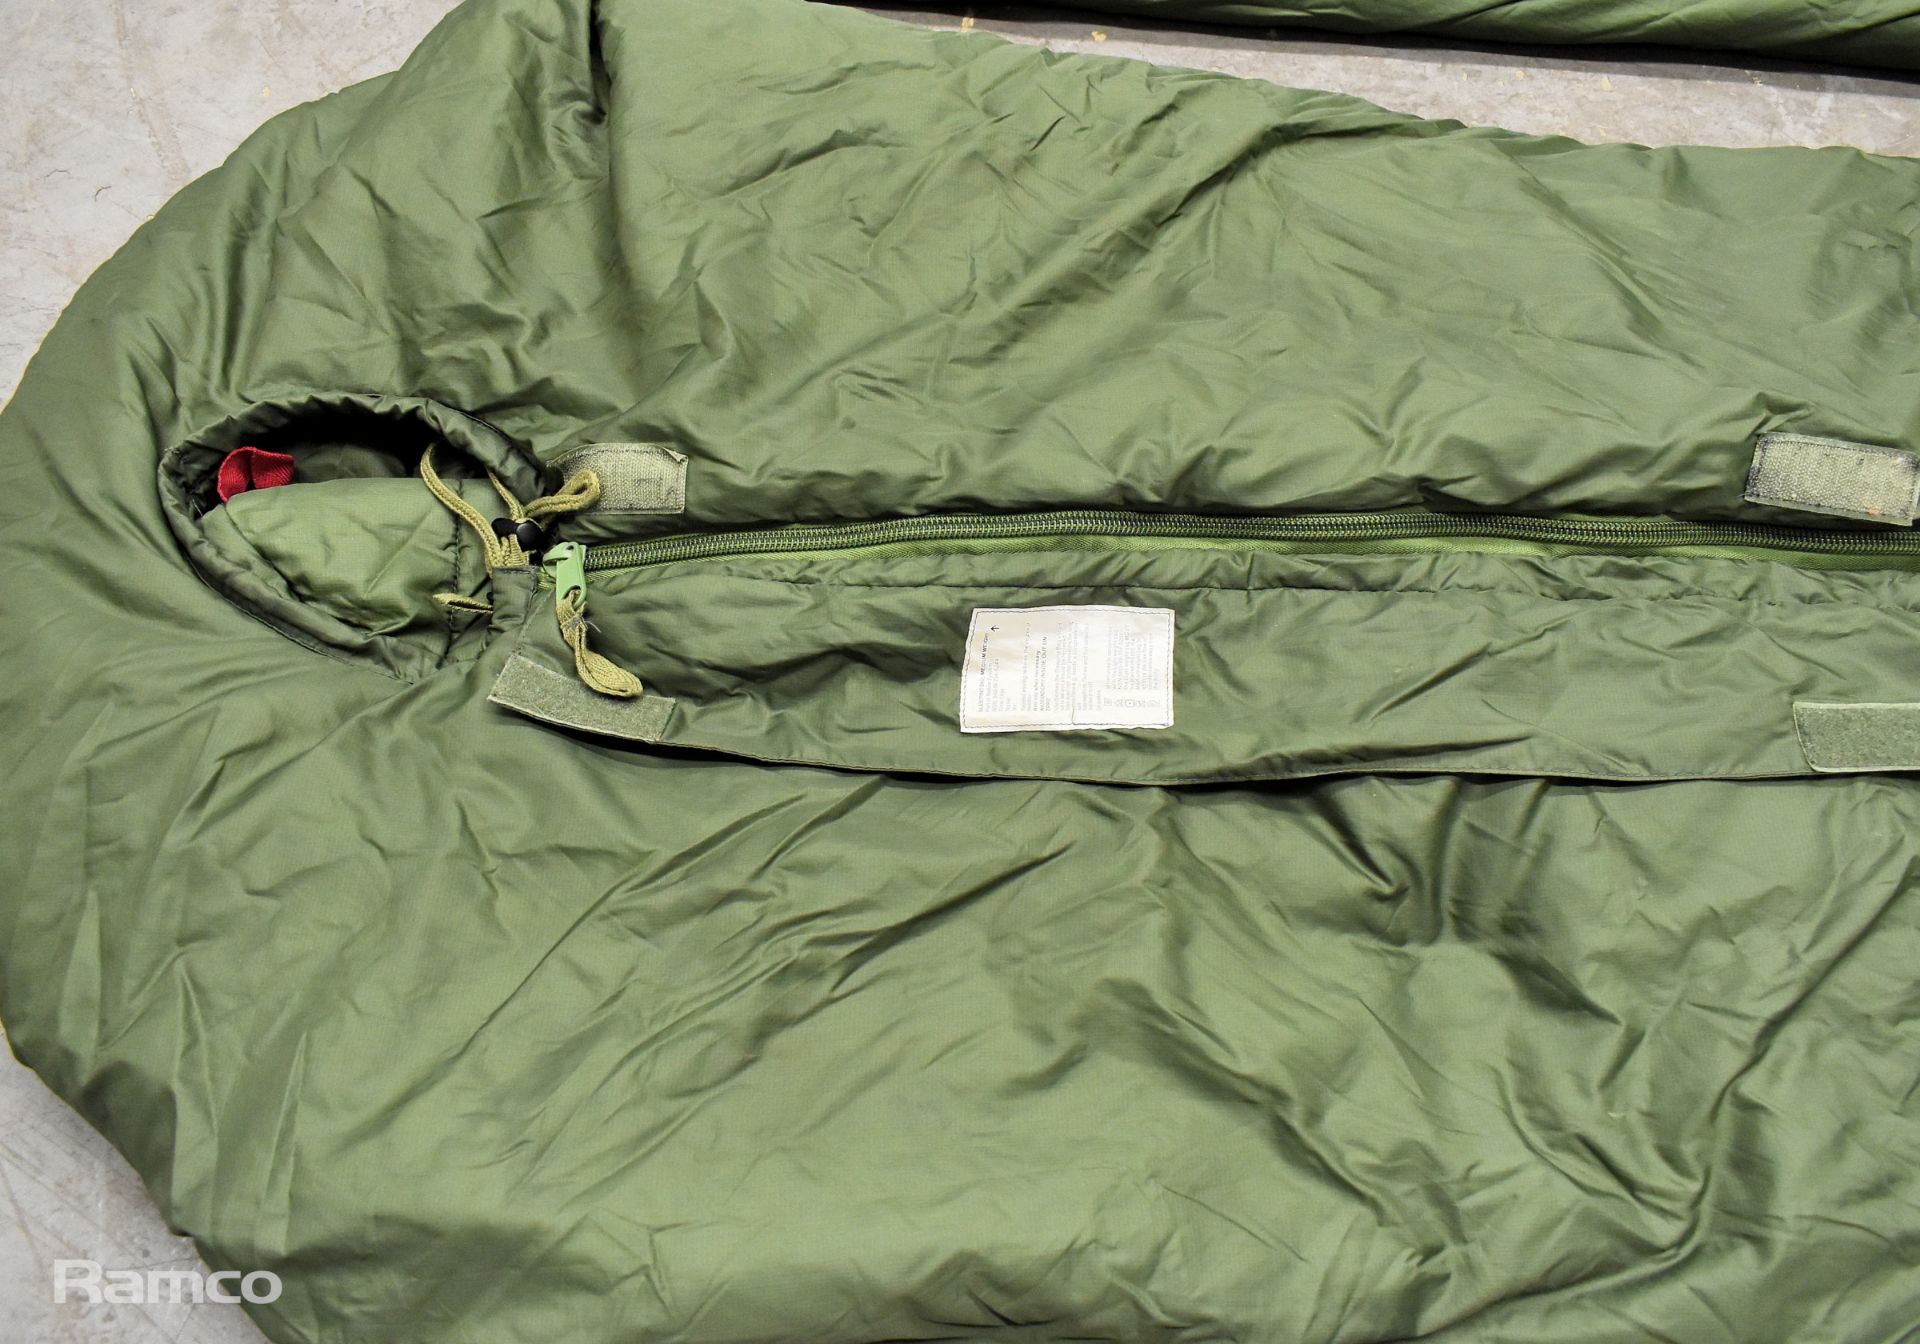 50x Sleeping bags - mixed grades and sizes - Image 6 of 8